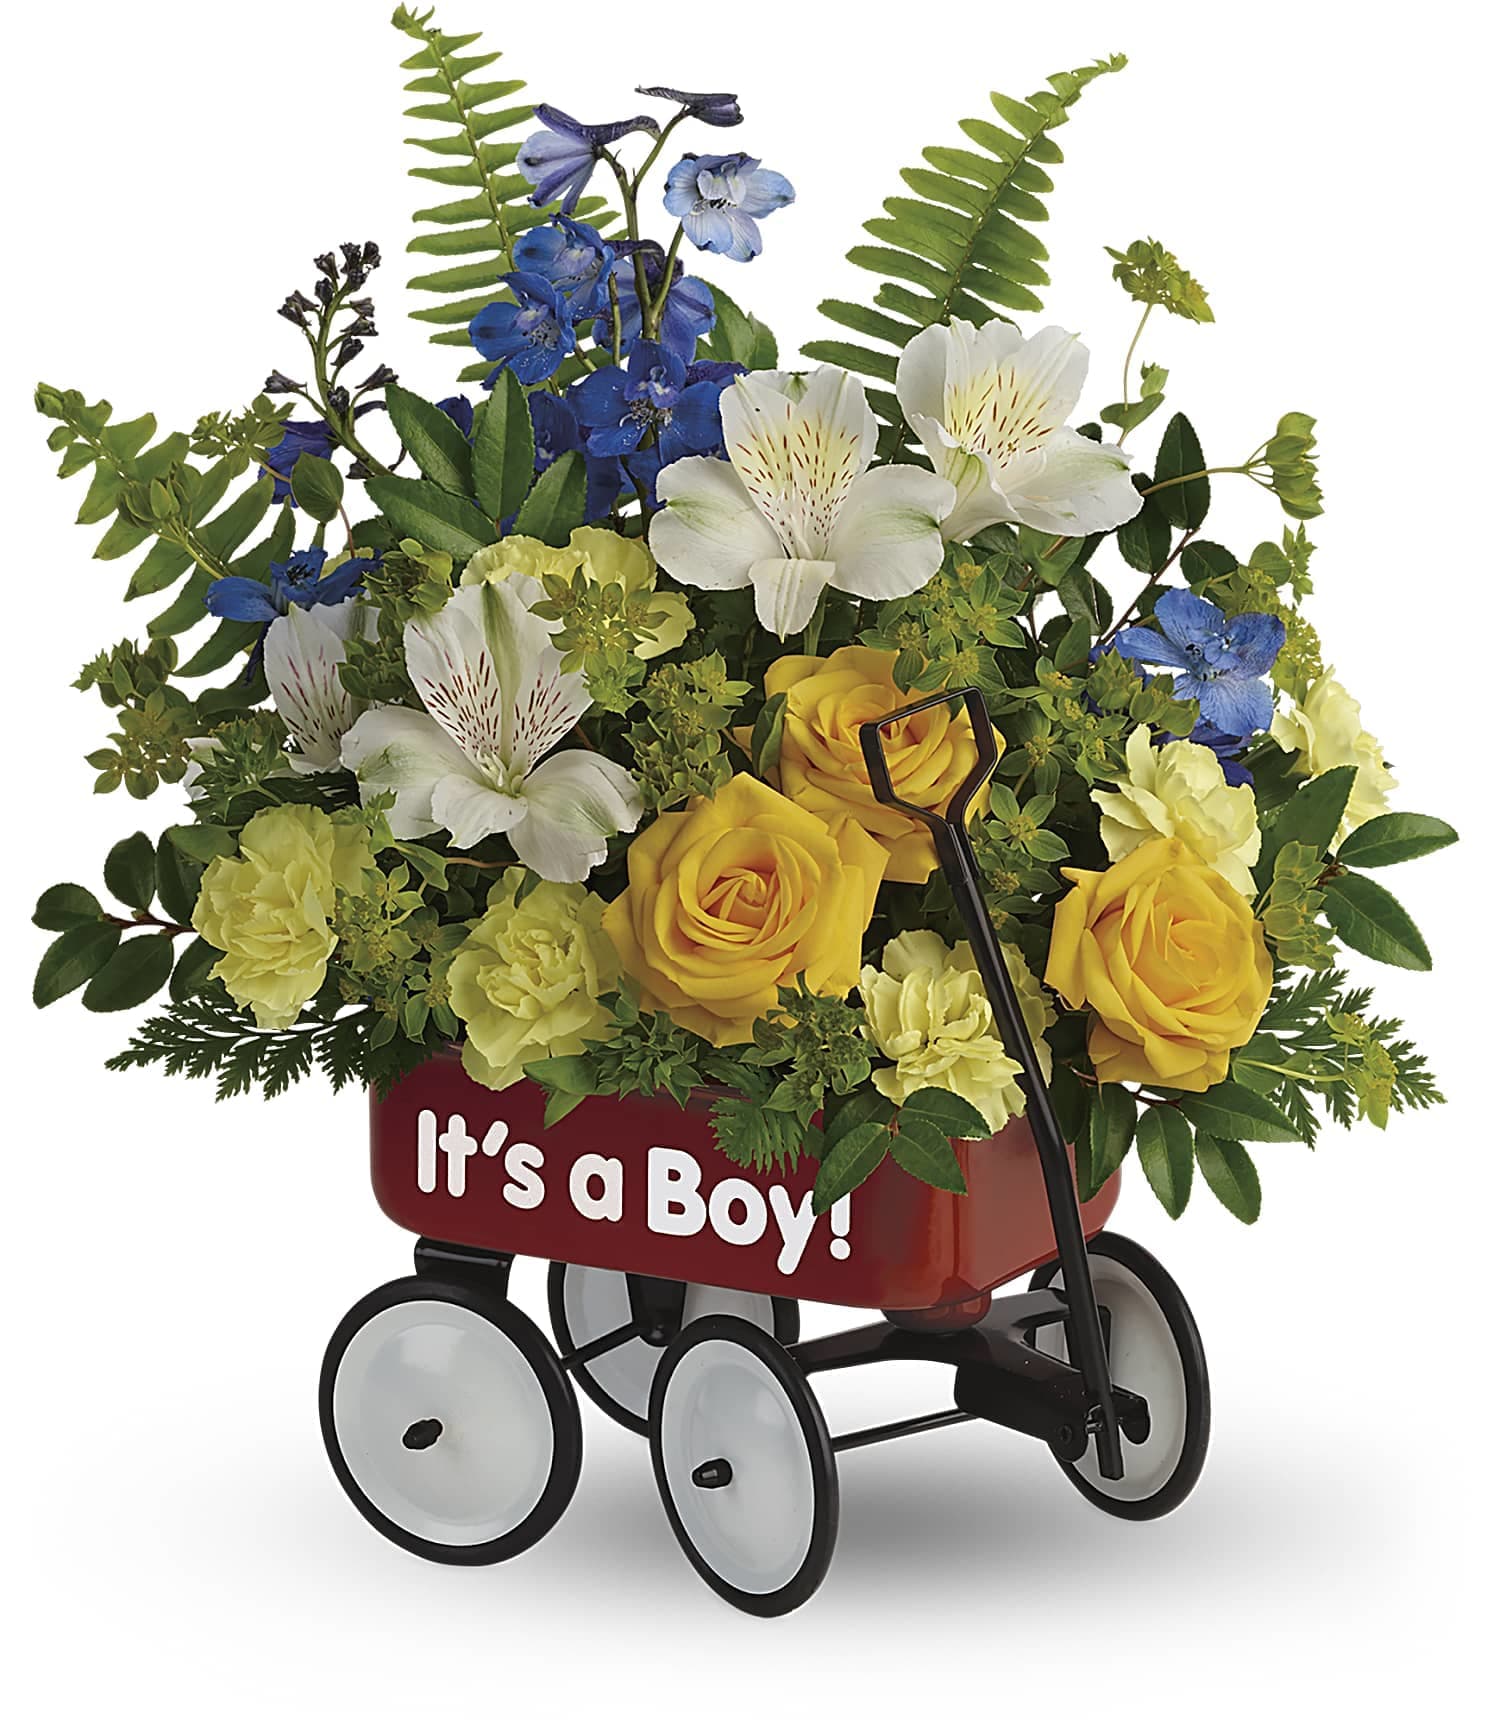 Sweet Little Wagon Bouquet - Give your welcome some wheels! A childhood classic, this cute red wagon is a whimsical way to send the new family a bright blue and yellow bouquet of roses and alstroemeria.  Flowers and colors may vary depending on availability.